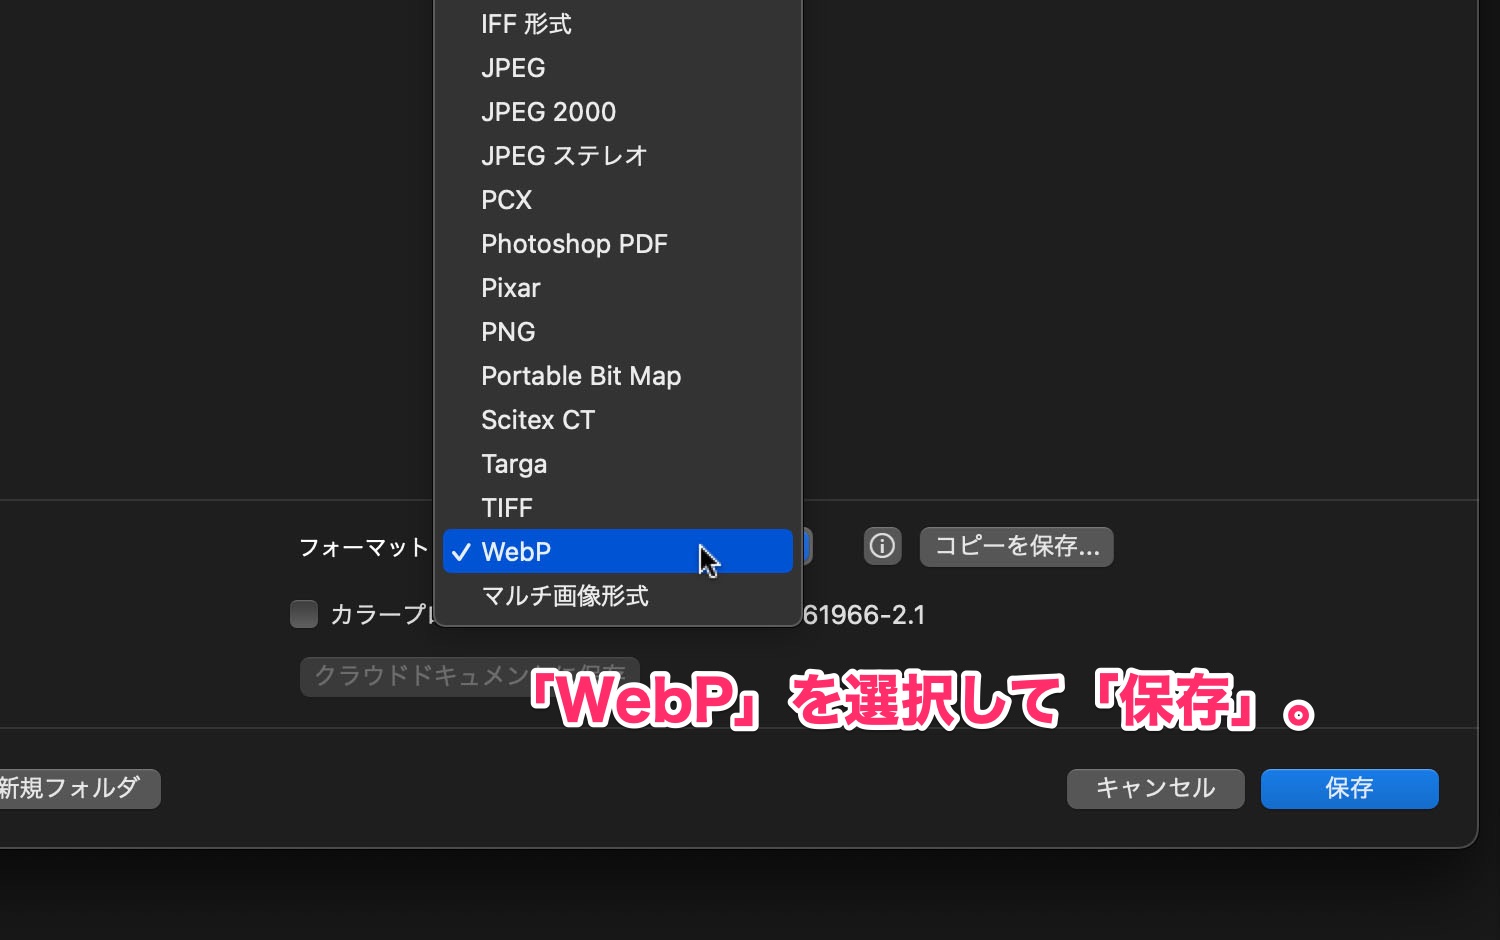 Select 'WebP' and 'Save'.